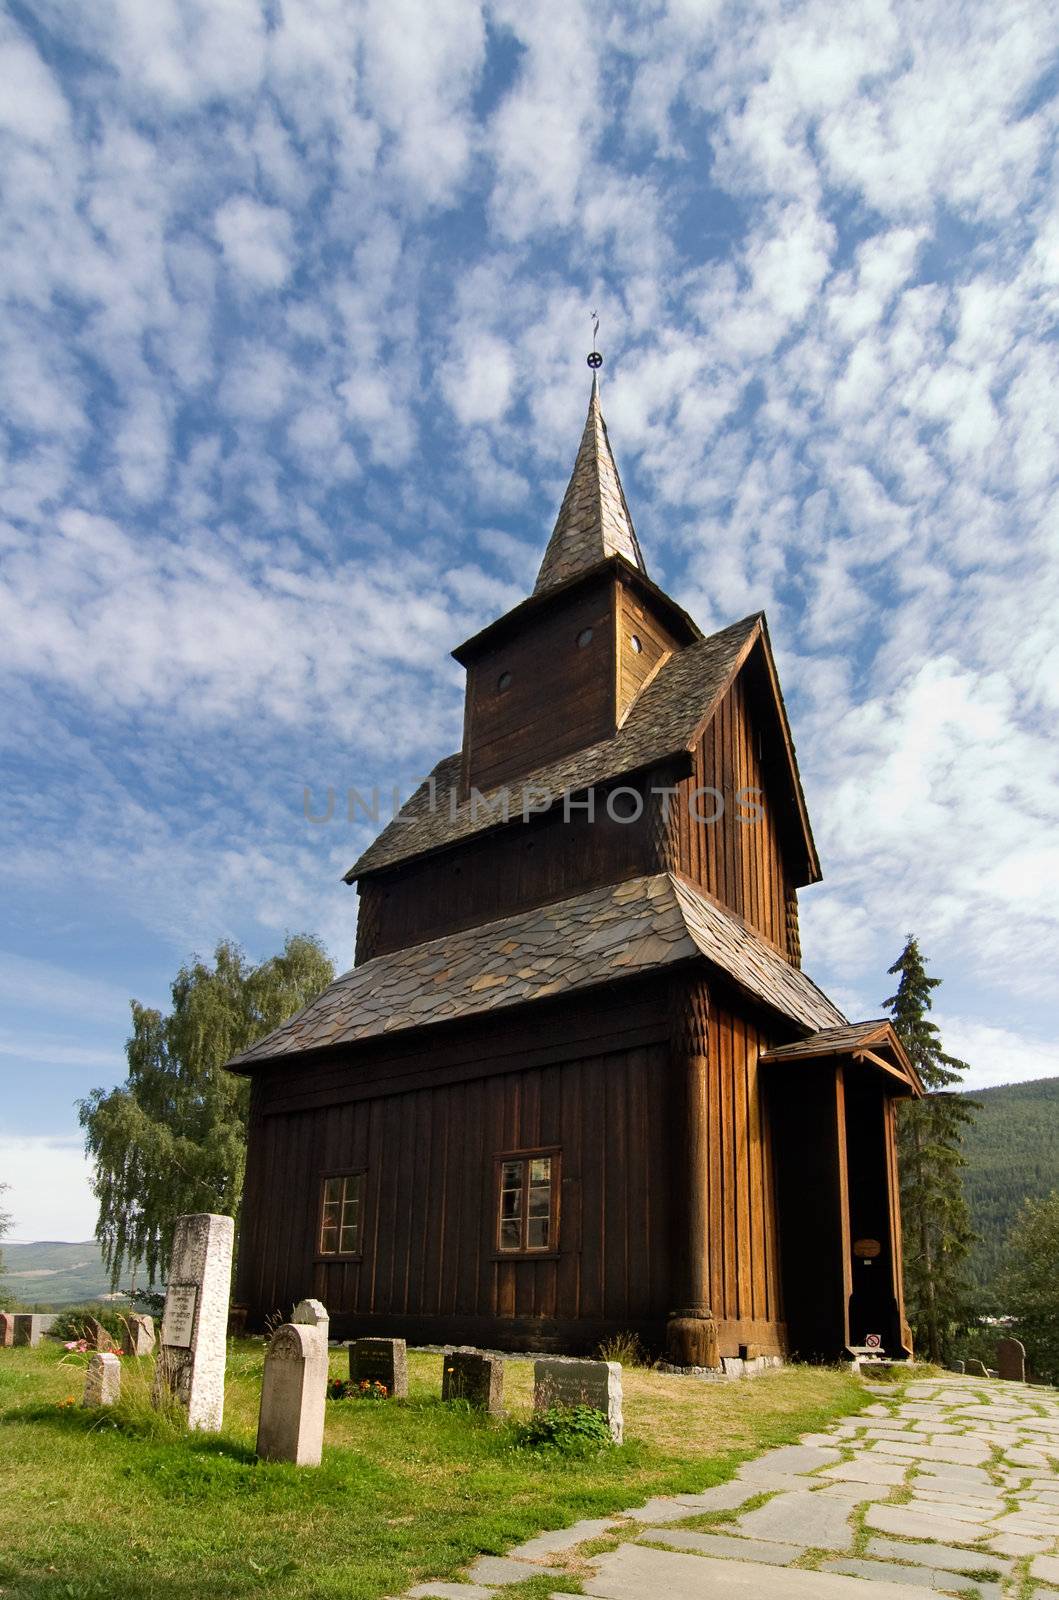 A stavechurch - stavkirke - in Norway located at Torpo built in the 13th century.